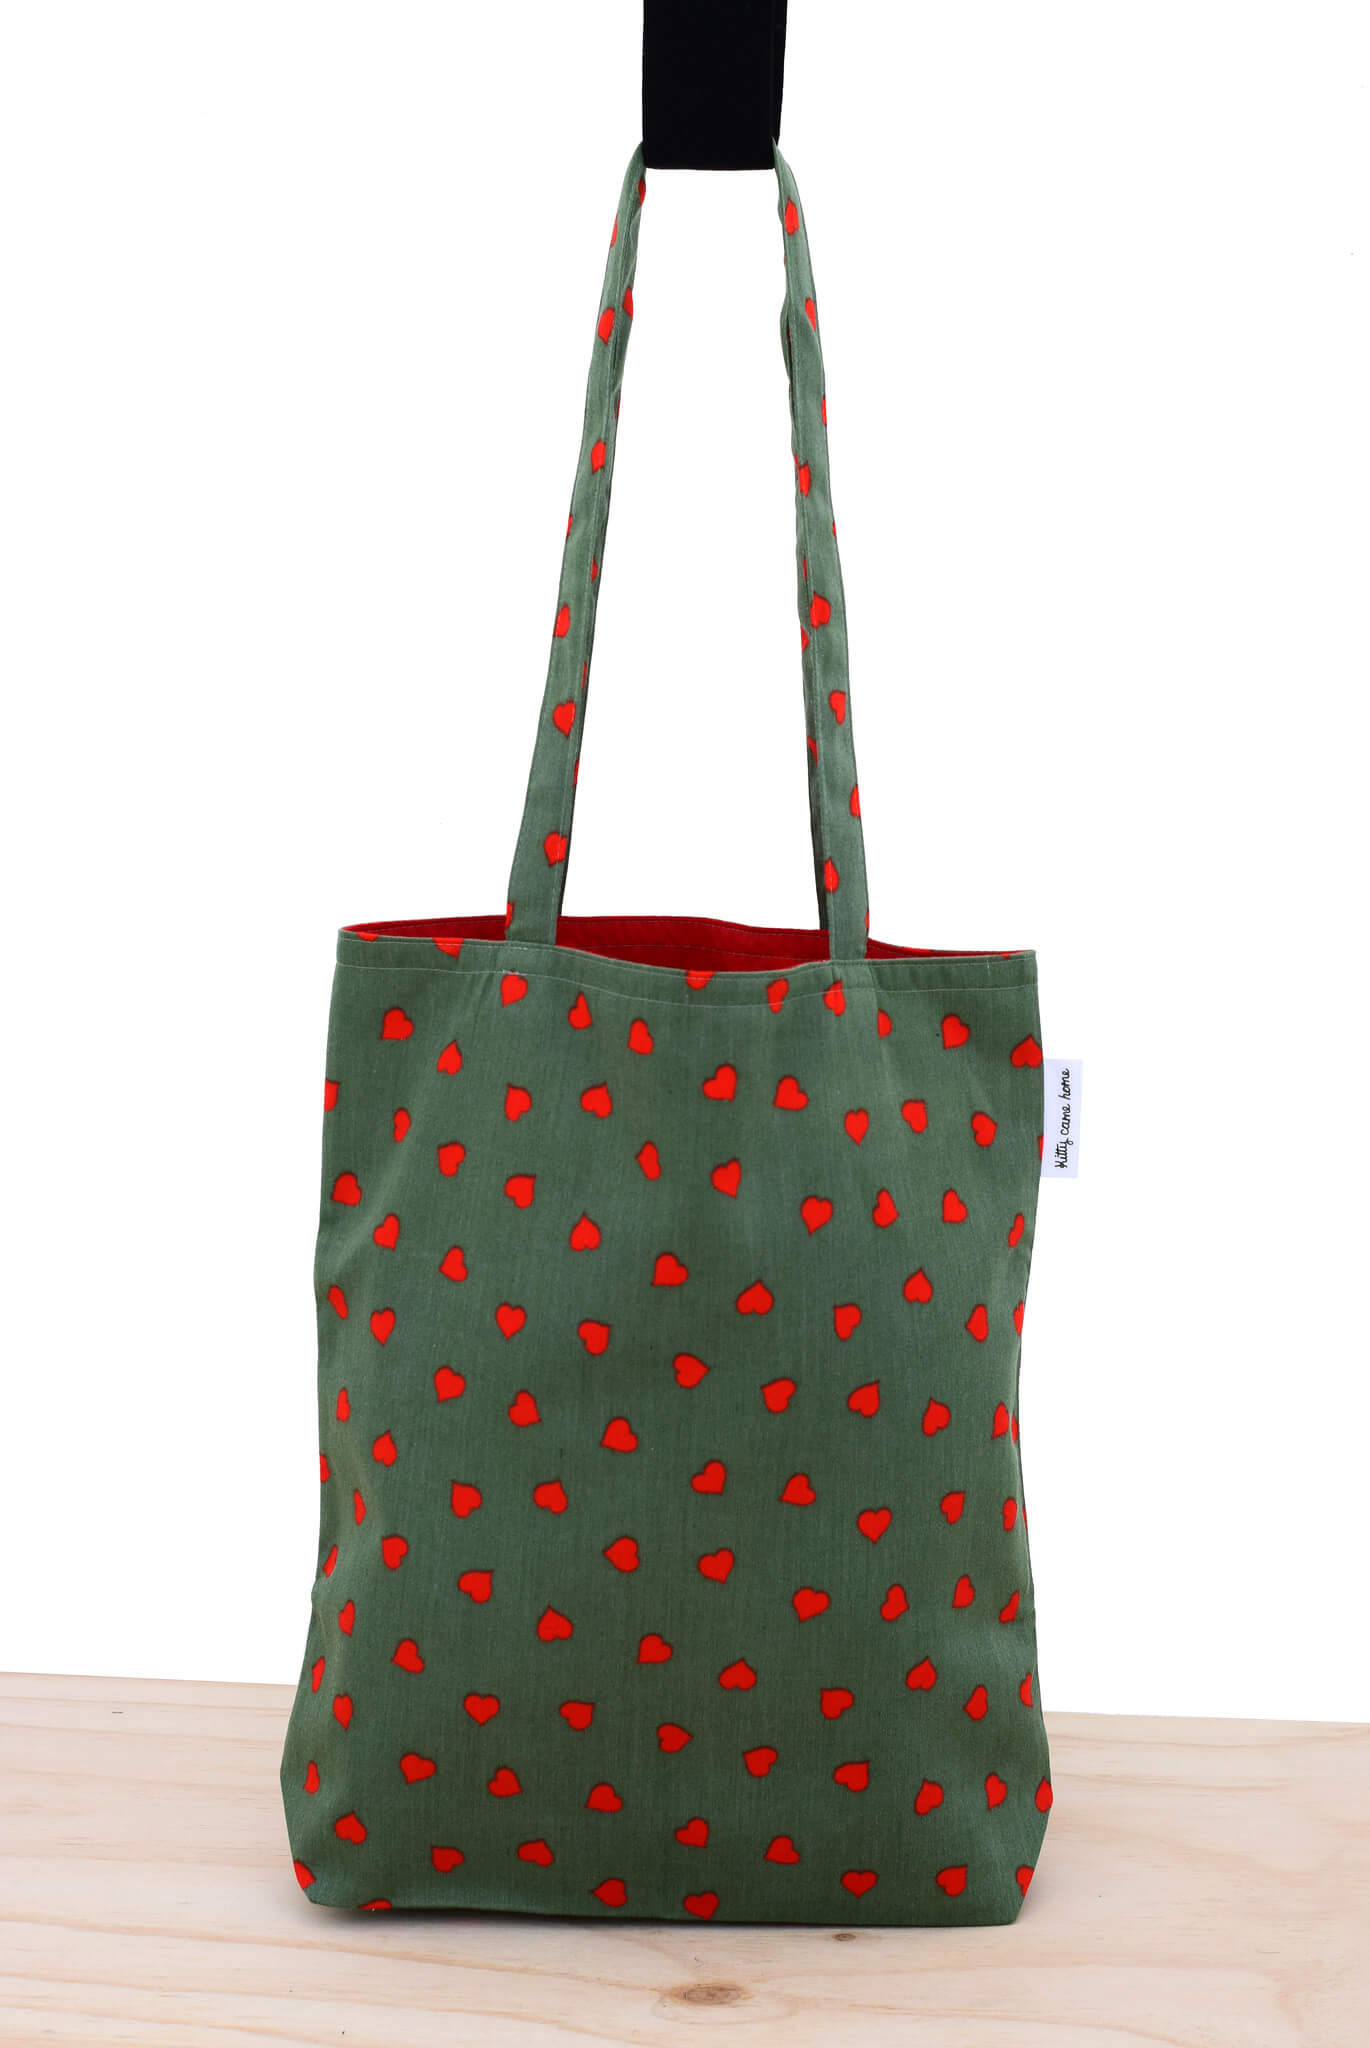 Tote Bag - Red hearts on green